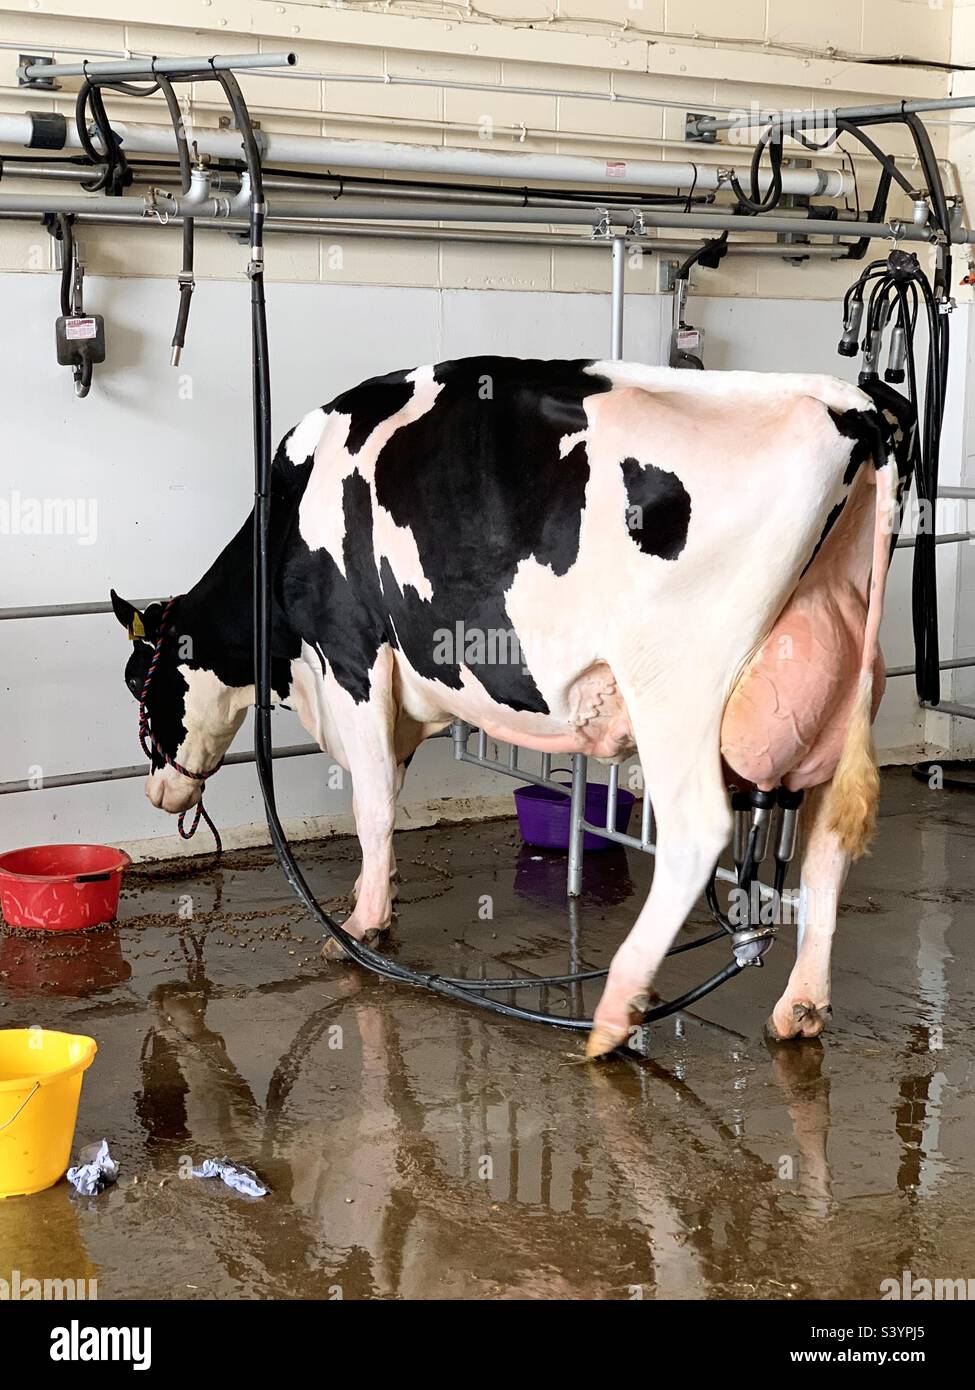 Large black and white Friesian cow being milked automatically at the Devon county show, England. Milking industry, milk, automated, udders Stock Photo